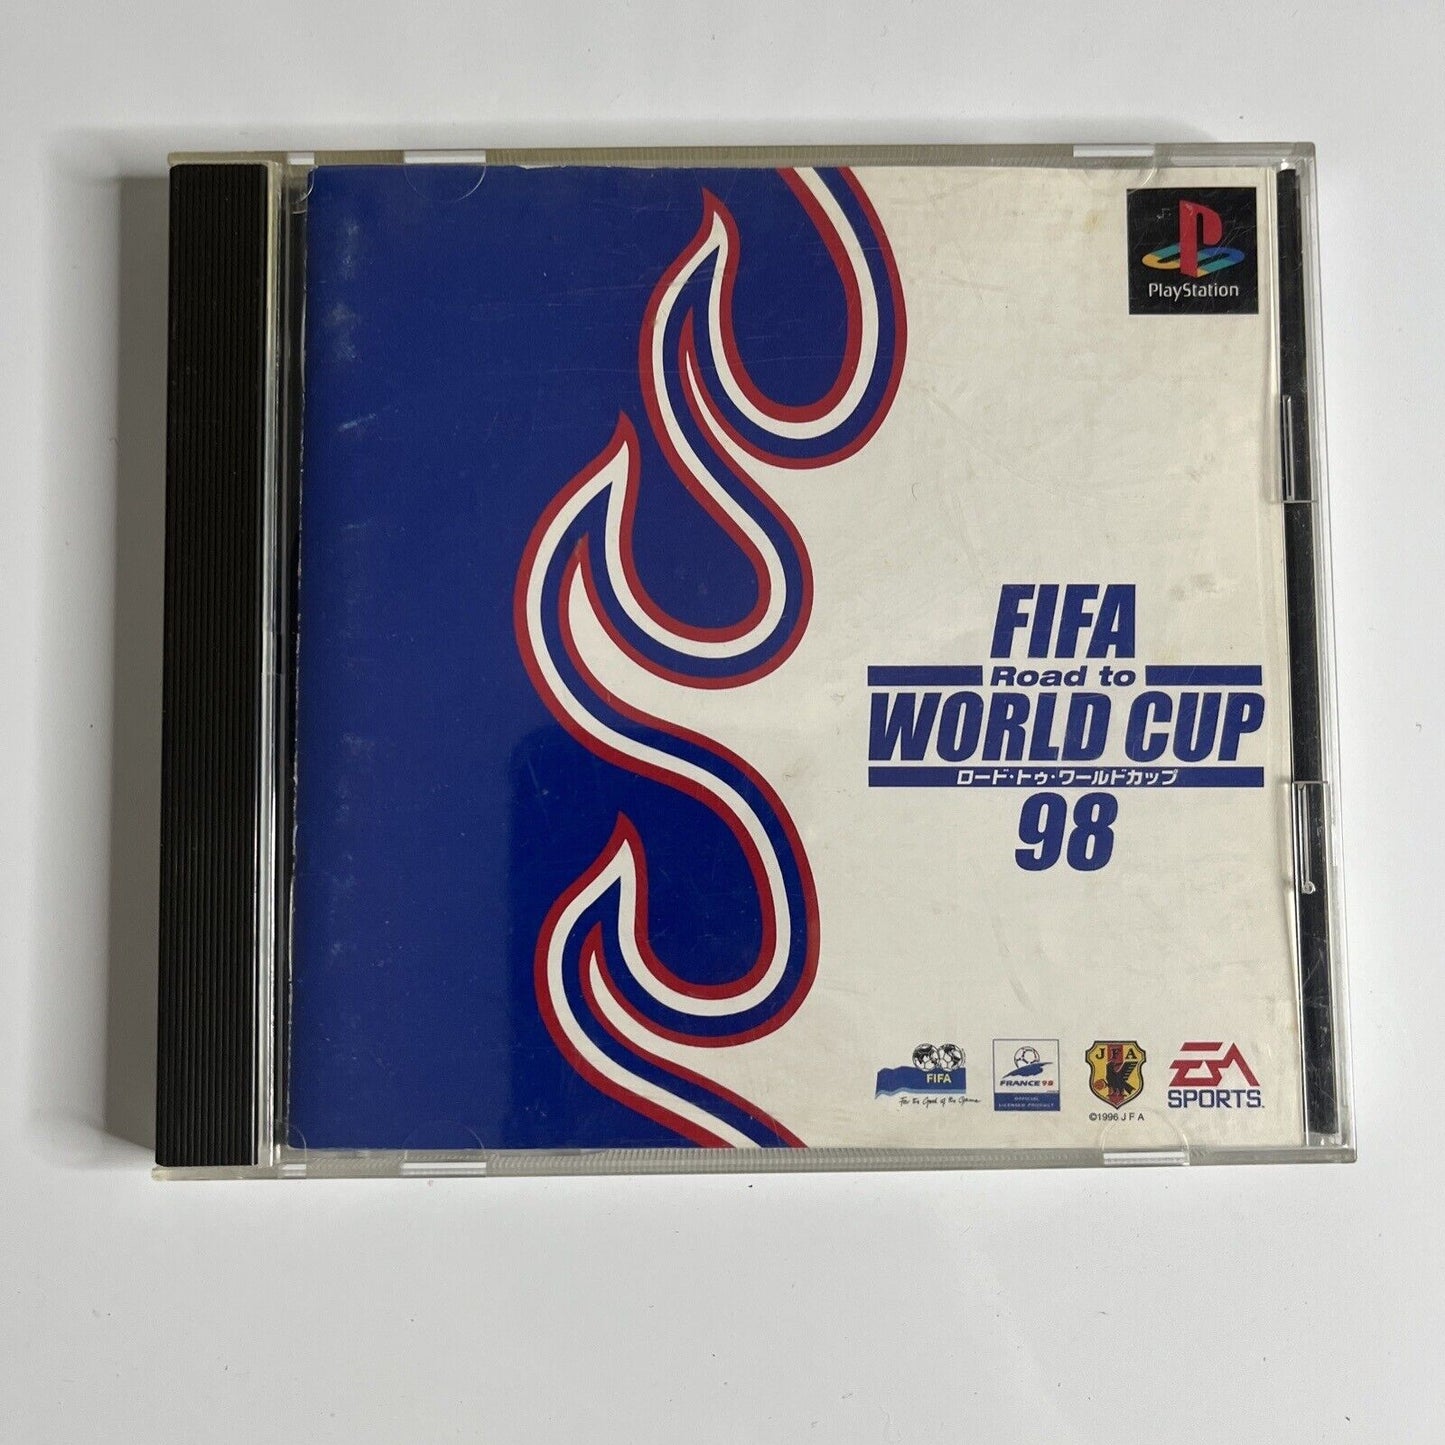 FIFA Road To World Cup 98 PS1 Sony PlayStation NTSC-J JAPAN Soccer Football Game